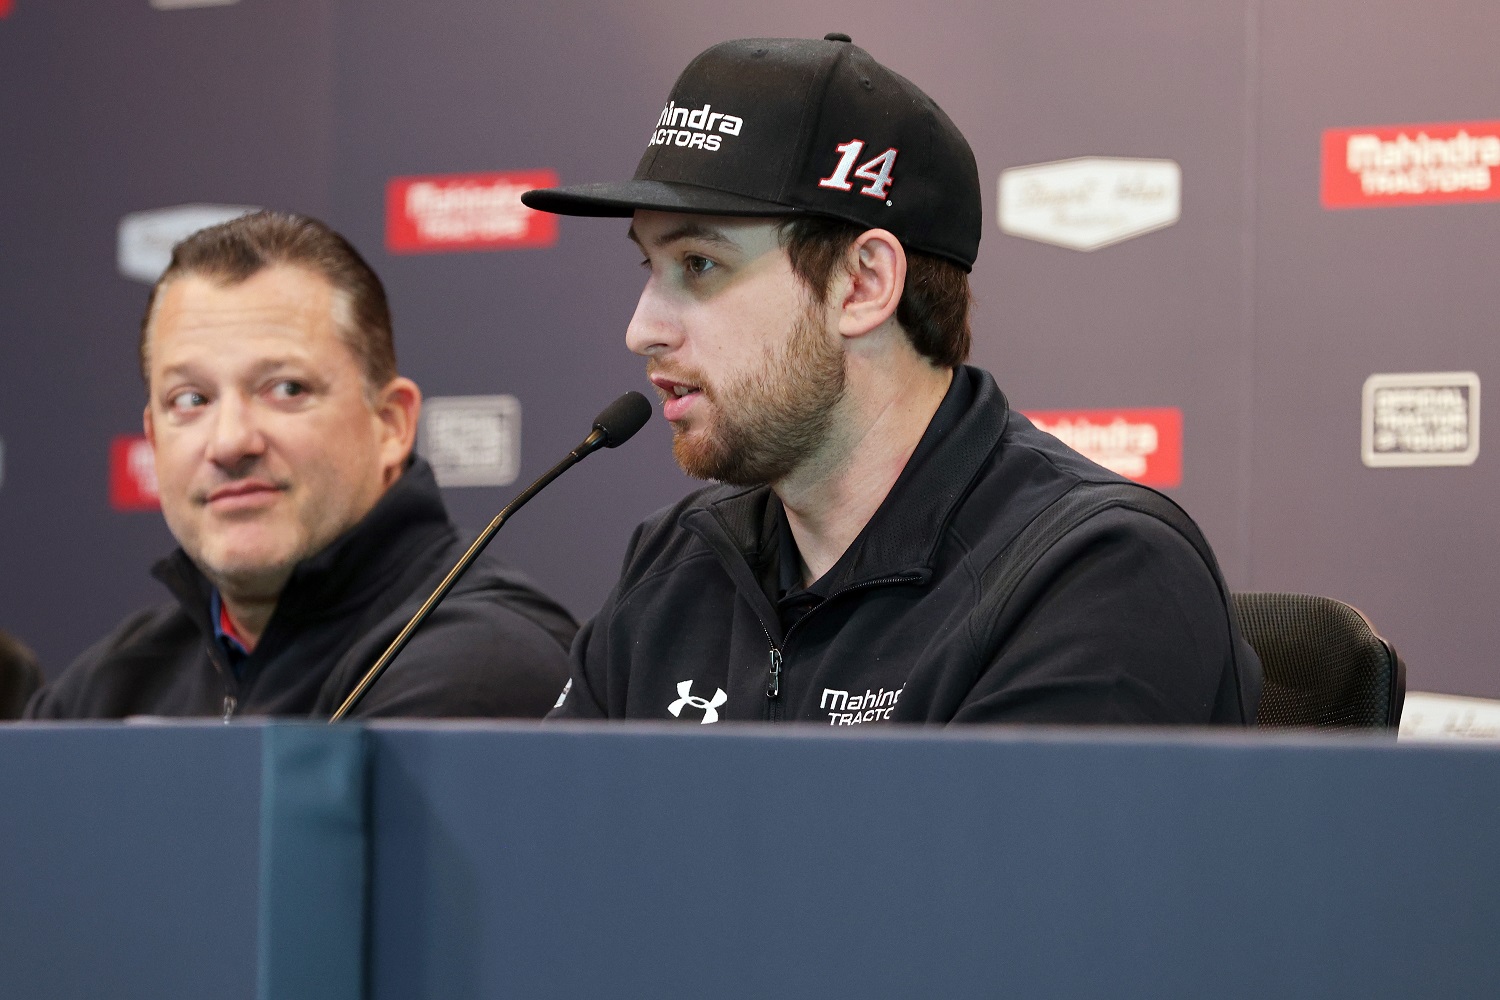 Chase Briscoe speaks as Tony Stewart looks on during a press event announcing a partnership between Stewart-Haas Racing and Mahindra Tractors on Dec. 10, 2021.